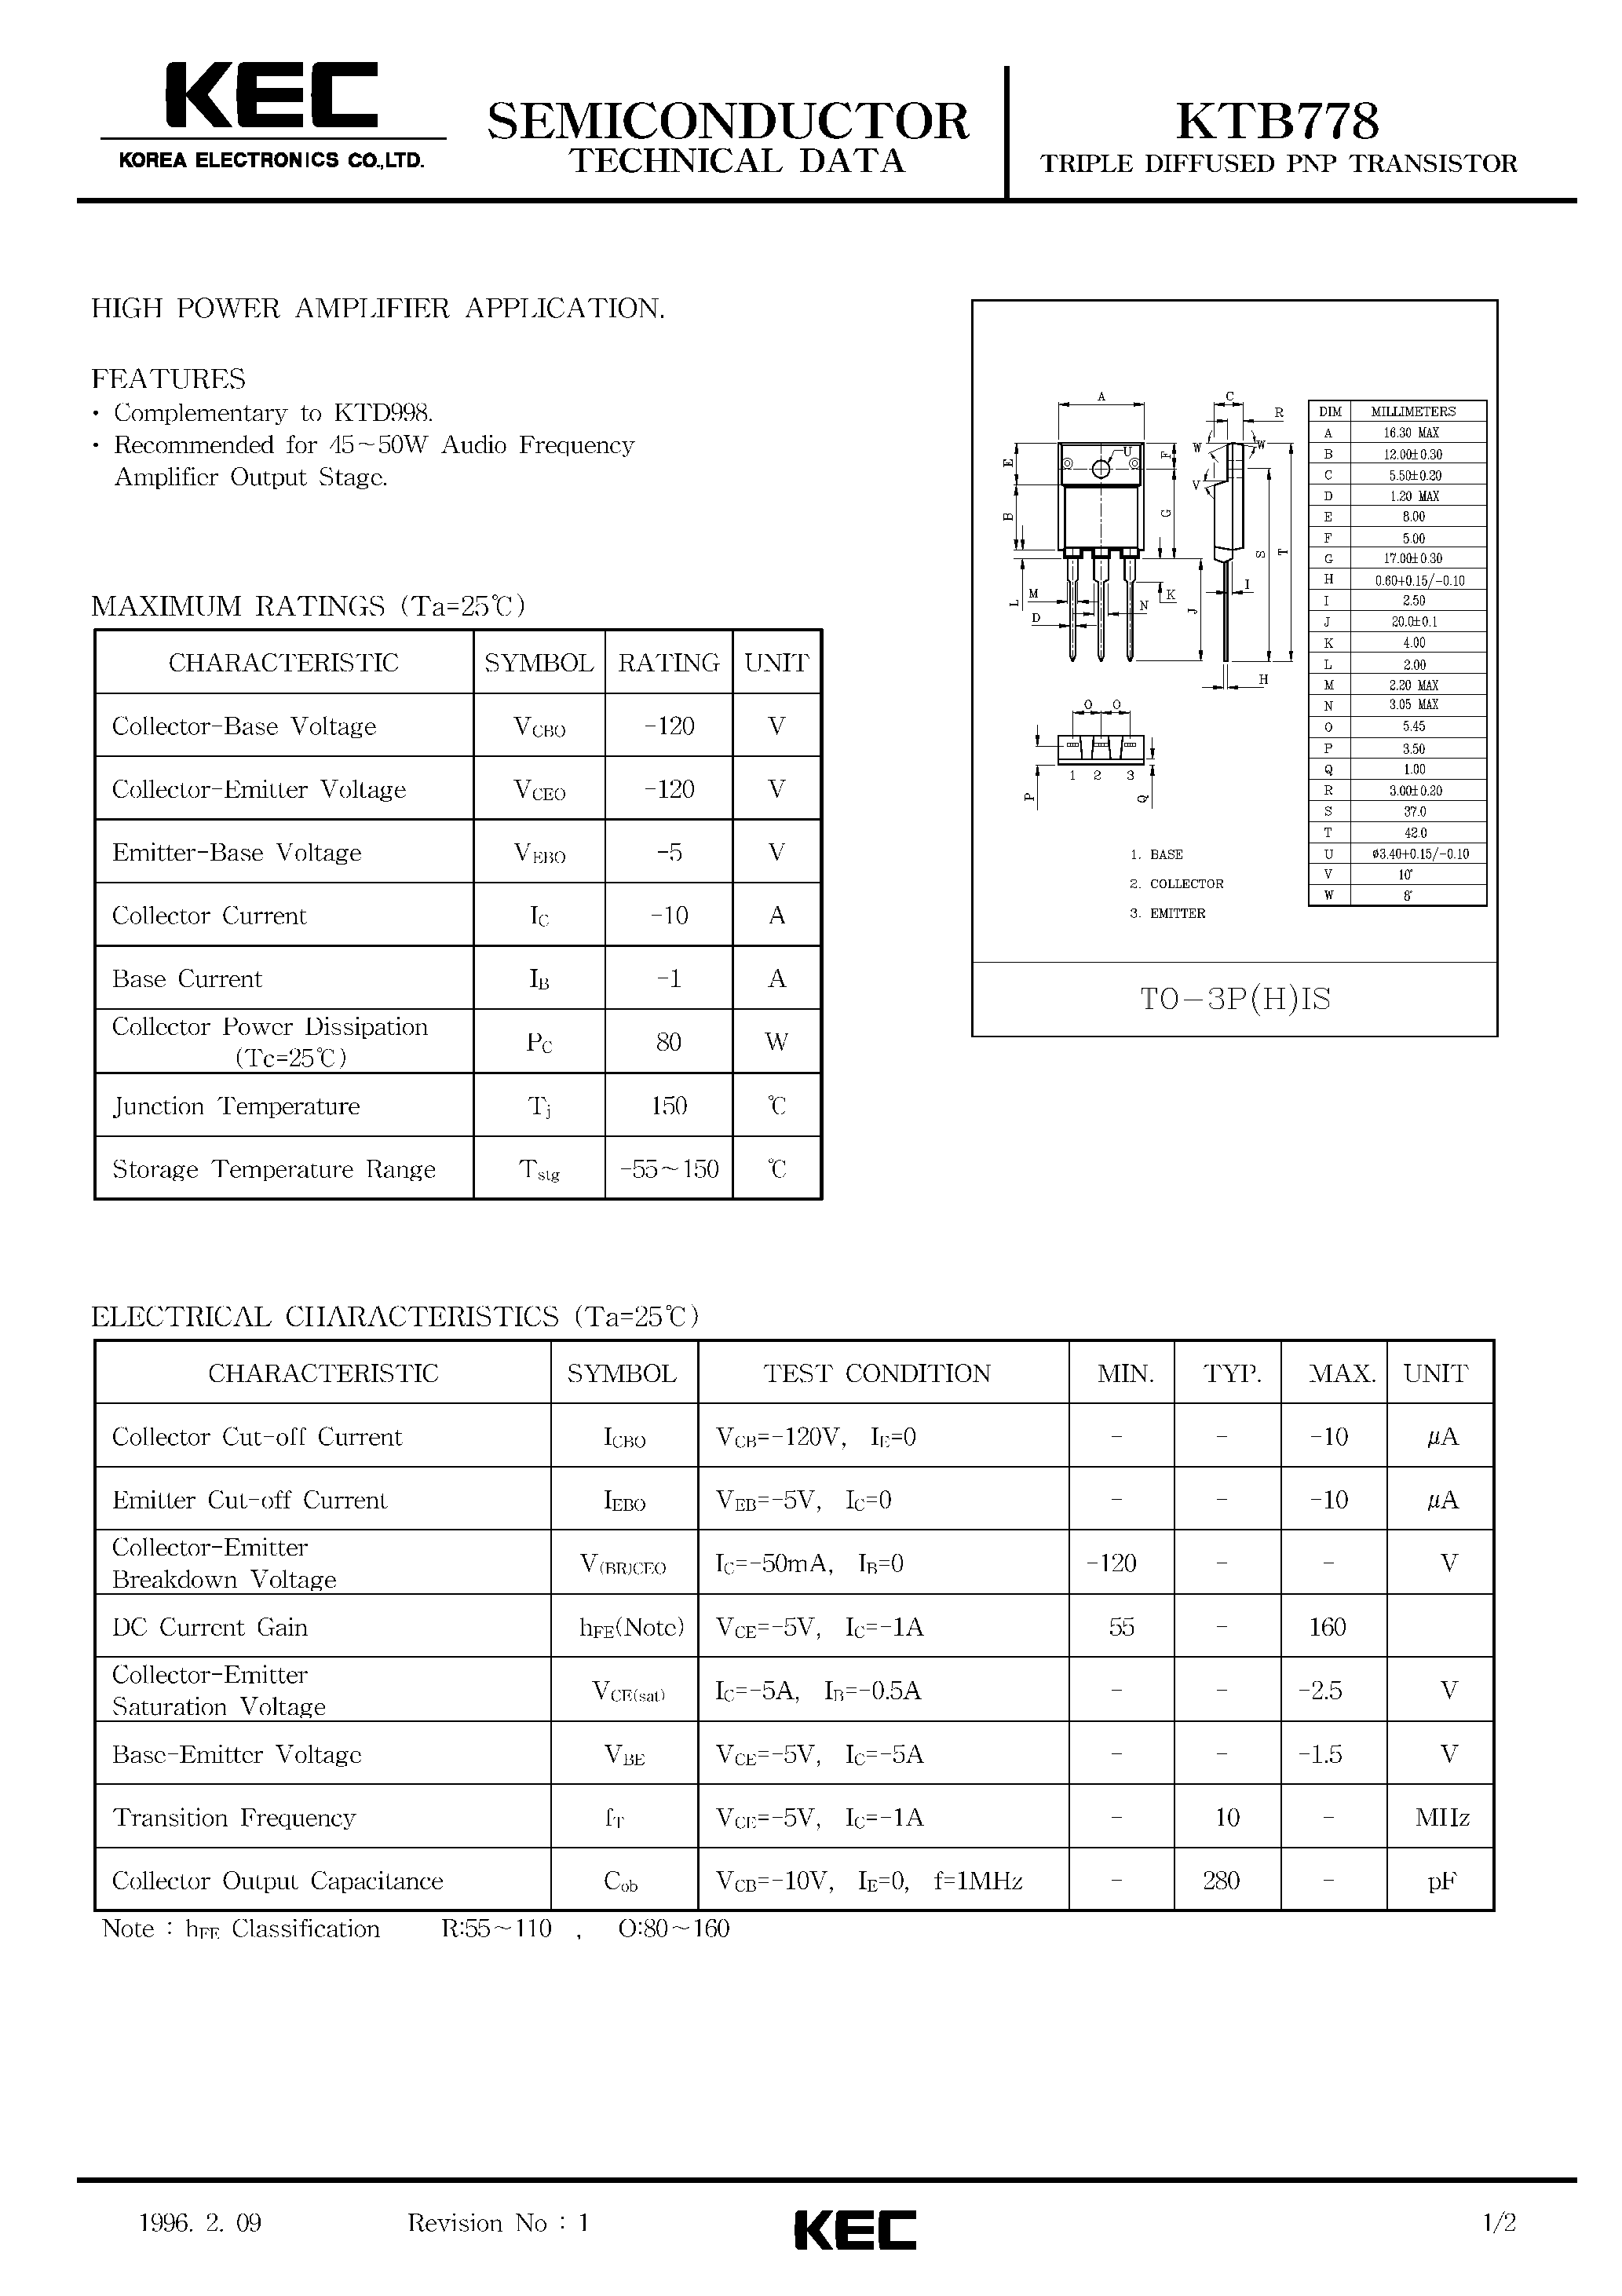 Datasheet KTB778 - TRIPLE DIFFUSED PNP TRANSISTOR(HIGH POWER AMPLIFIER) page 1